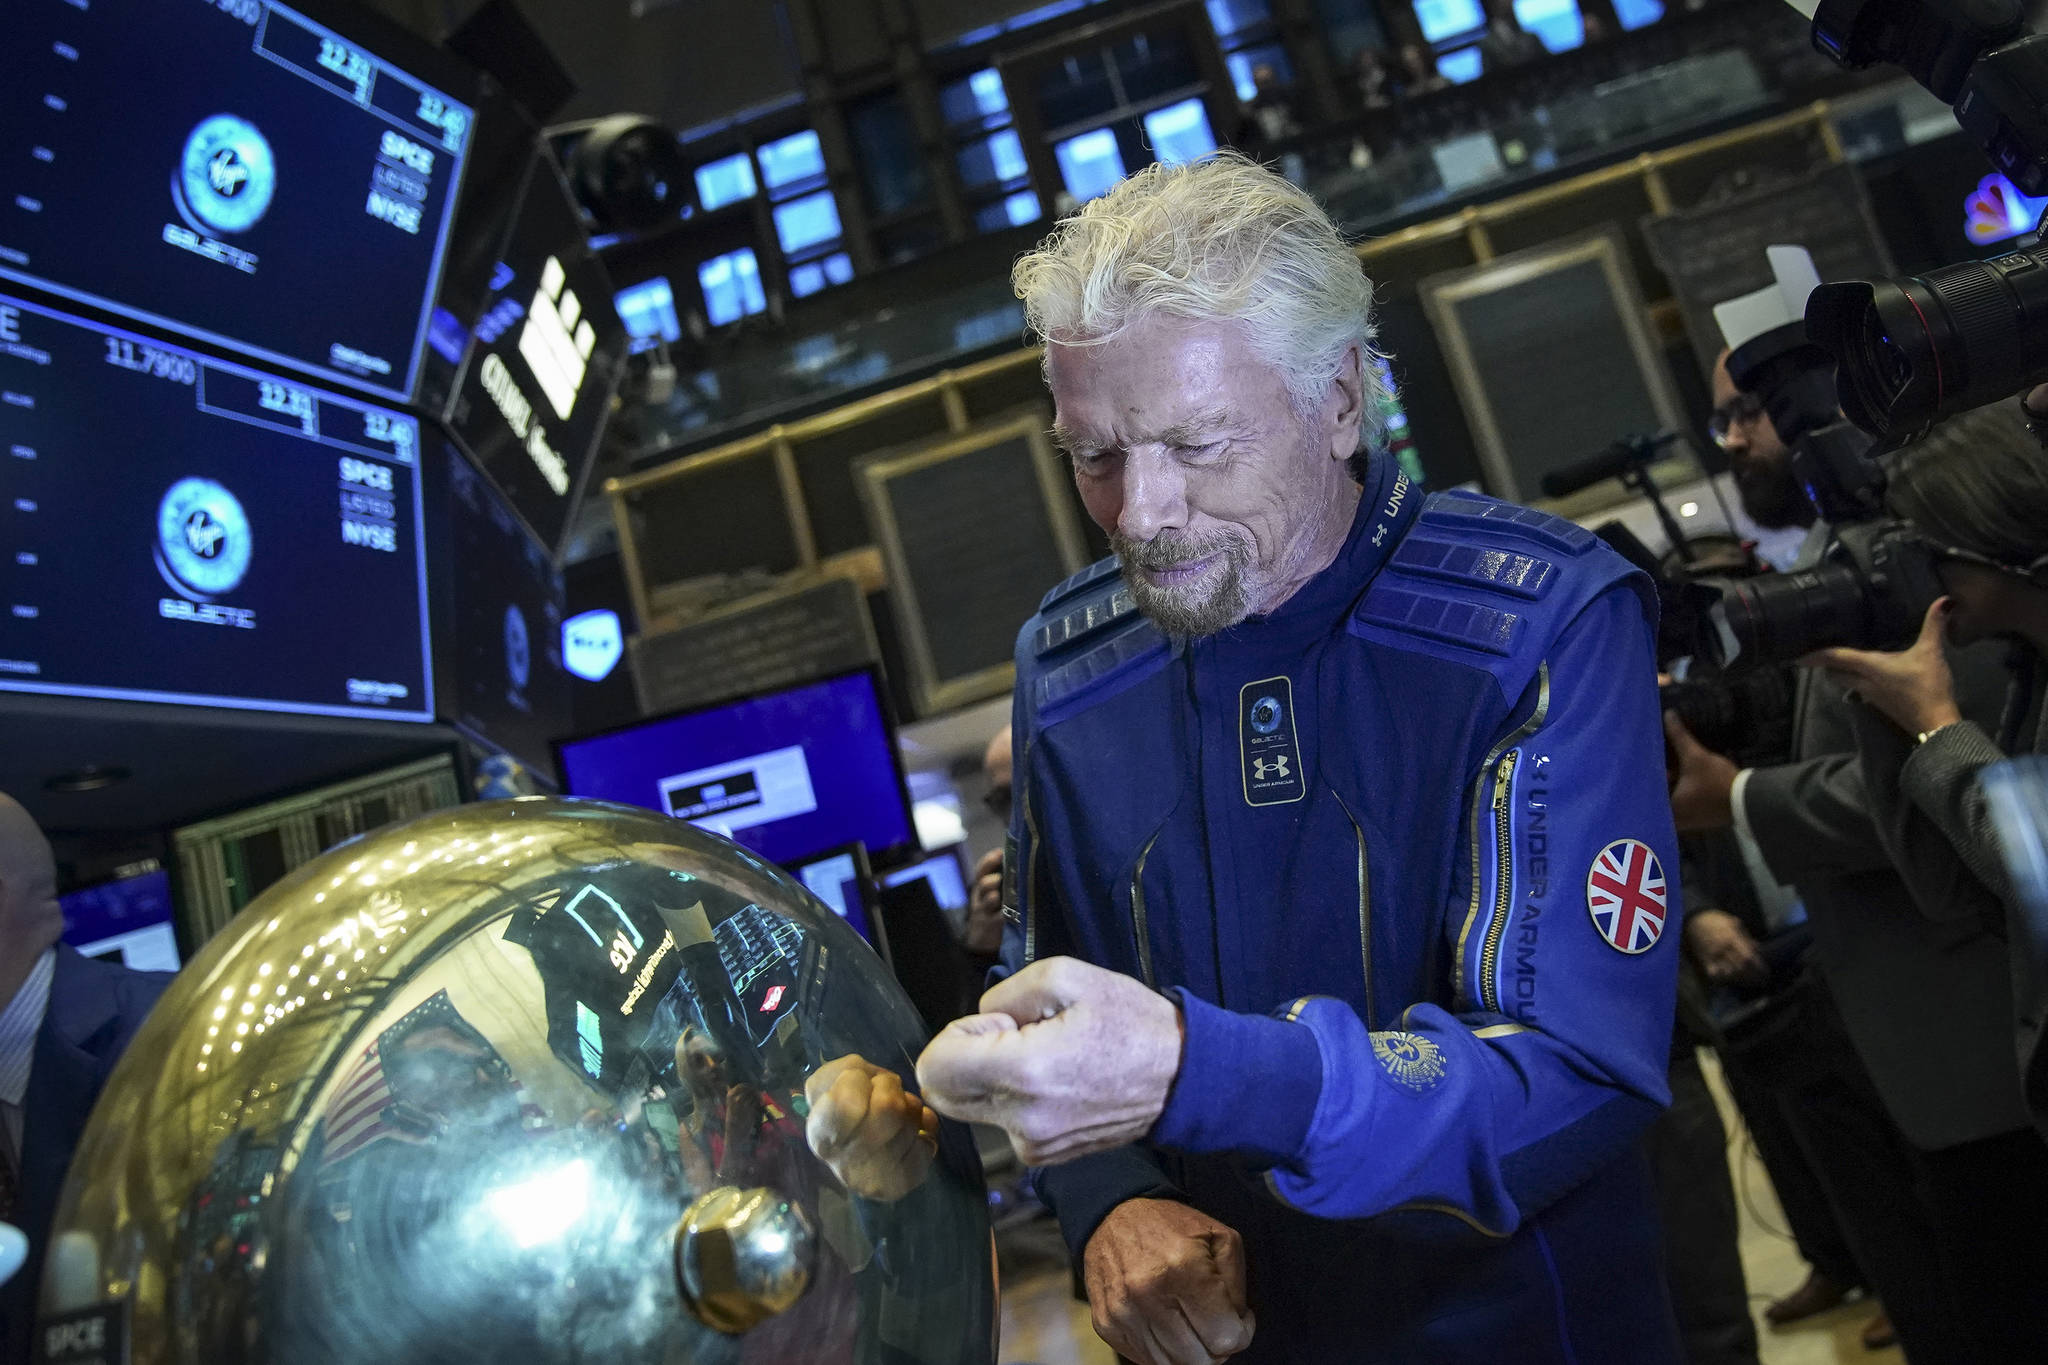 Drew Angerer/Getty Images 
In this photo from October 28, 2019, Sir Richard Branson, founder of Virgin Galactic, arrives on the floor of the New York Stock Exchange before ringing a ceremonial bell to promote the first day of trading of Virgin Galactic Holdings shares in New York City. On Monday evening, Branson’s space tourism venture said it was reviewing the timing of its next flight test after discovering unspecified “fatigue and stress” on the airplane used to carry the spacecraft aloft.